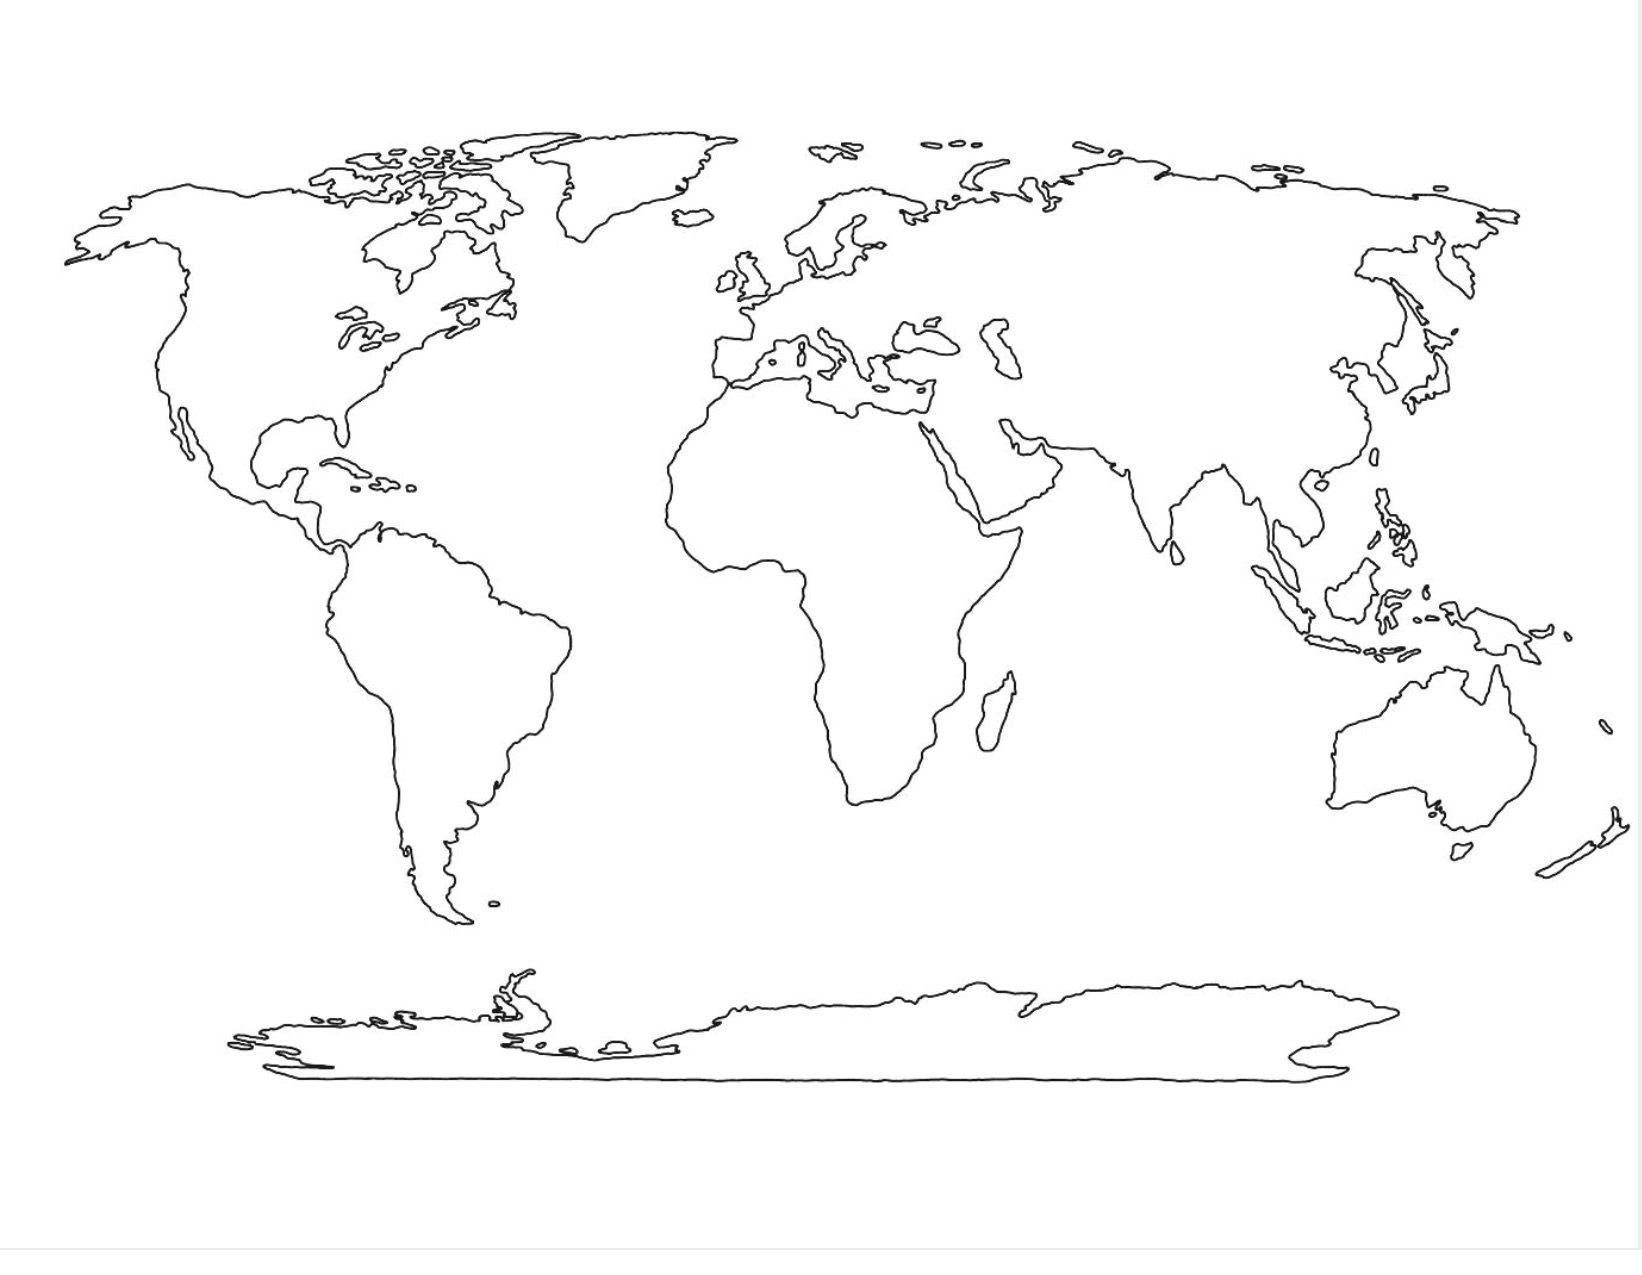 Coloring pages are a wonderful activity for kids and adults. Seven Continents Coloring Page At Getdrawings Free Download